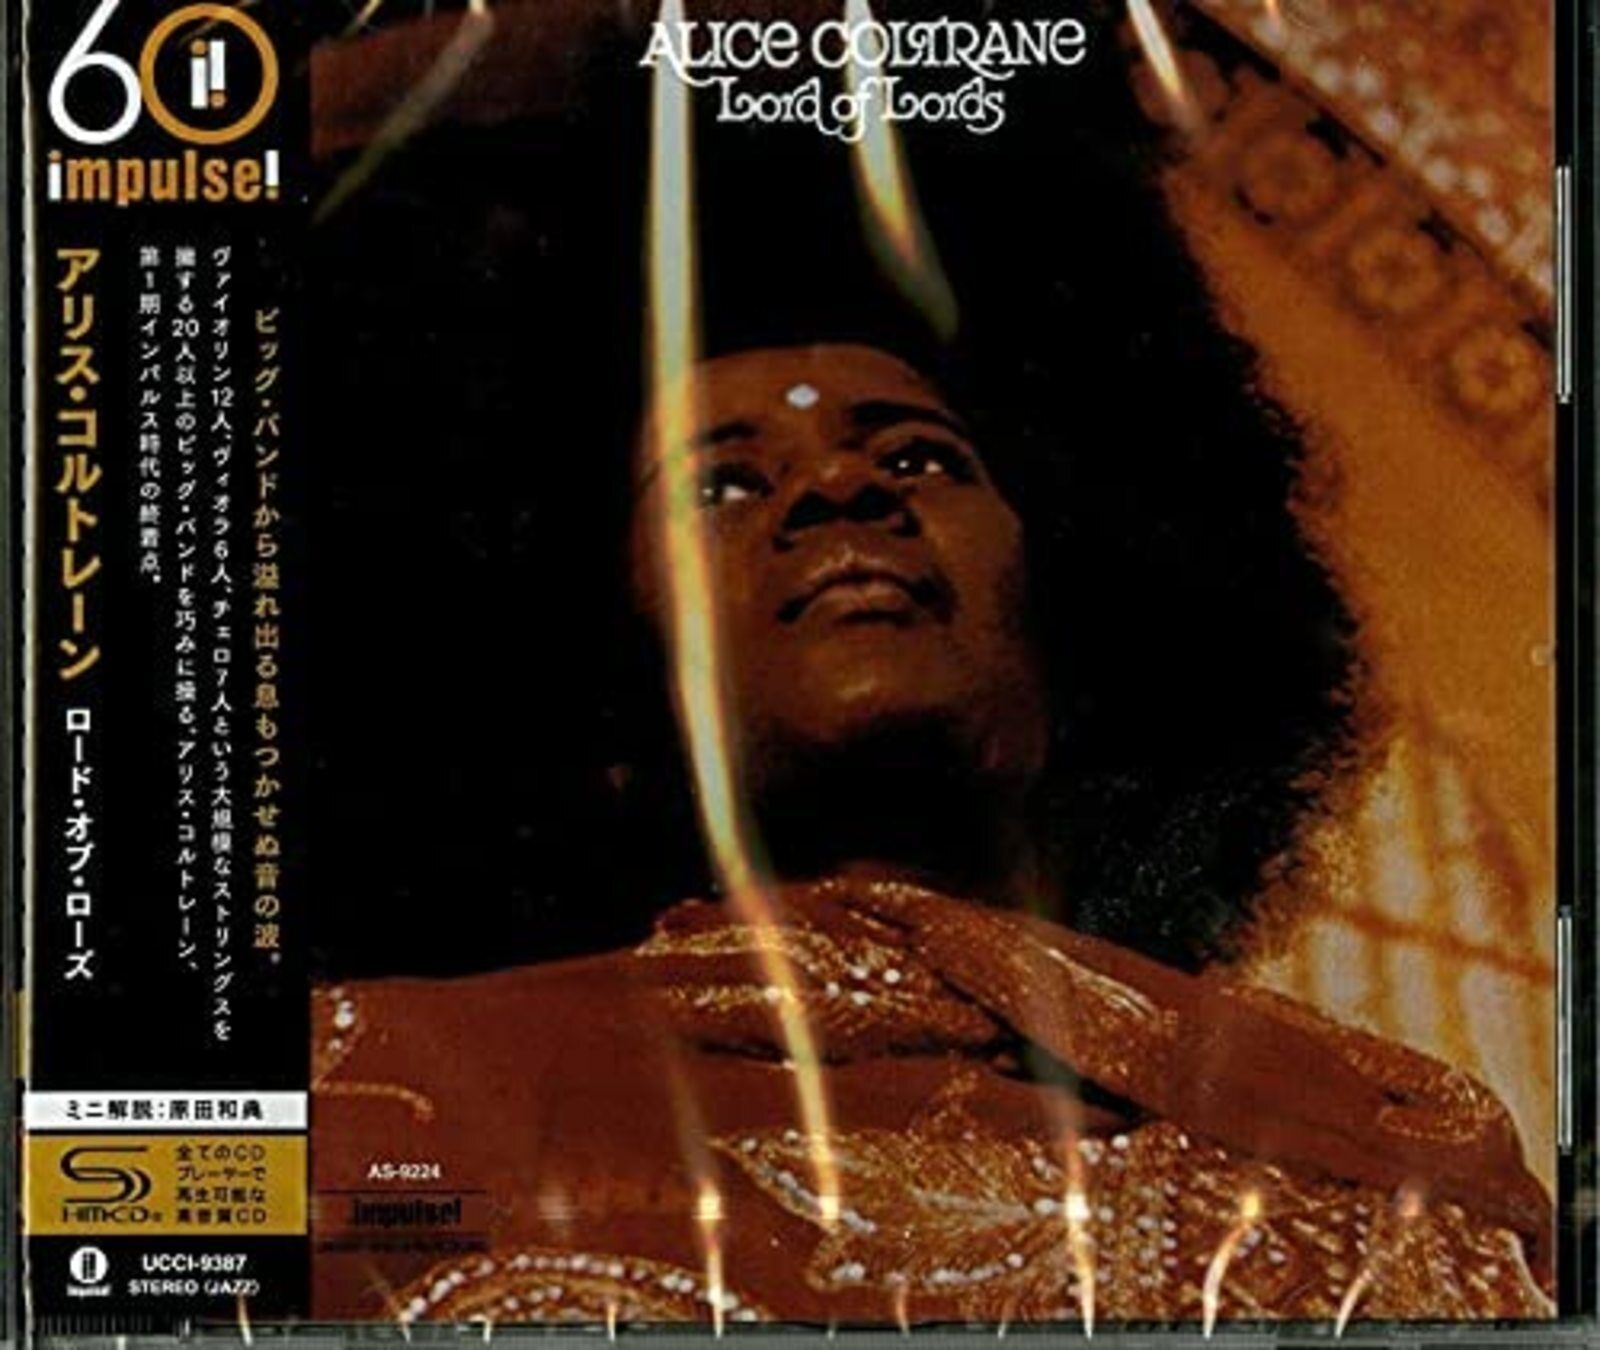 ALICE COLTRANE-LORD OF ROSE-SHM-CD Free Shipping with Tracking# New from Japan